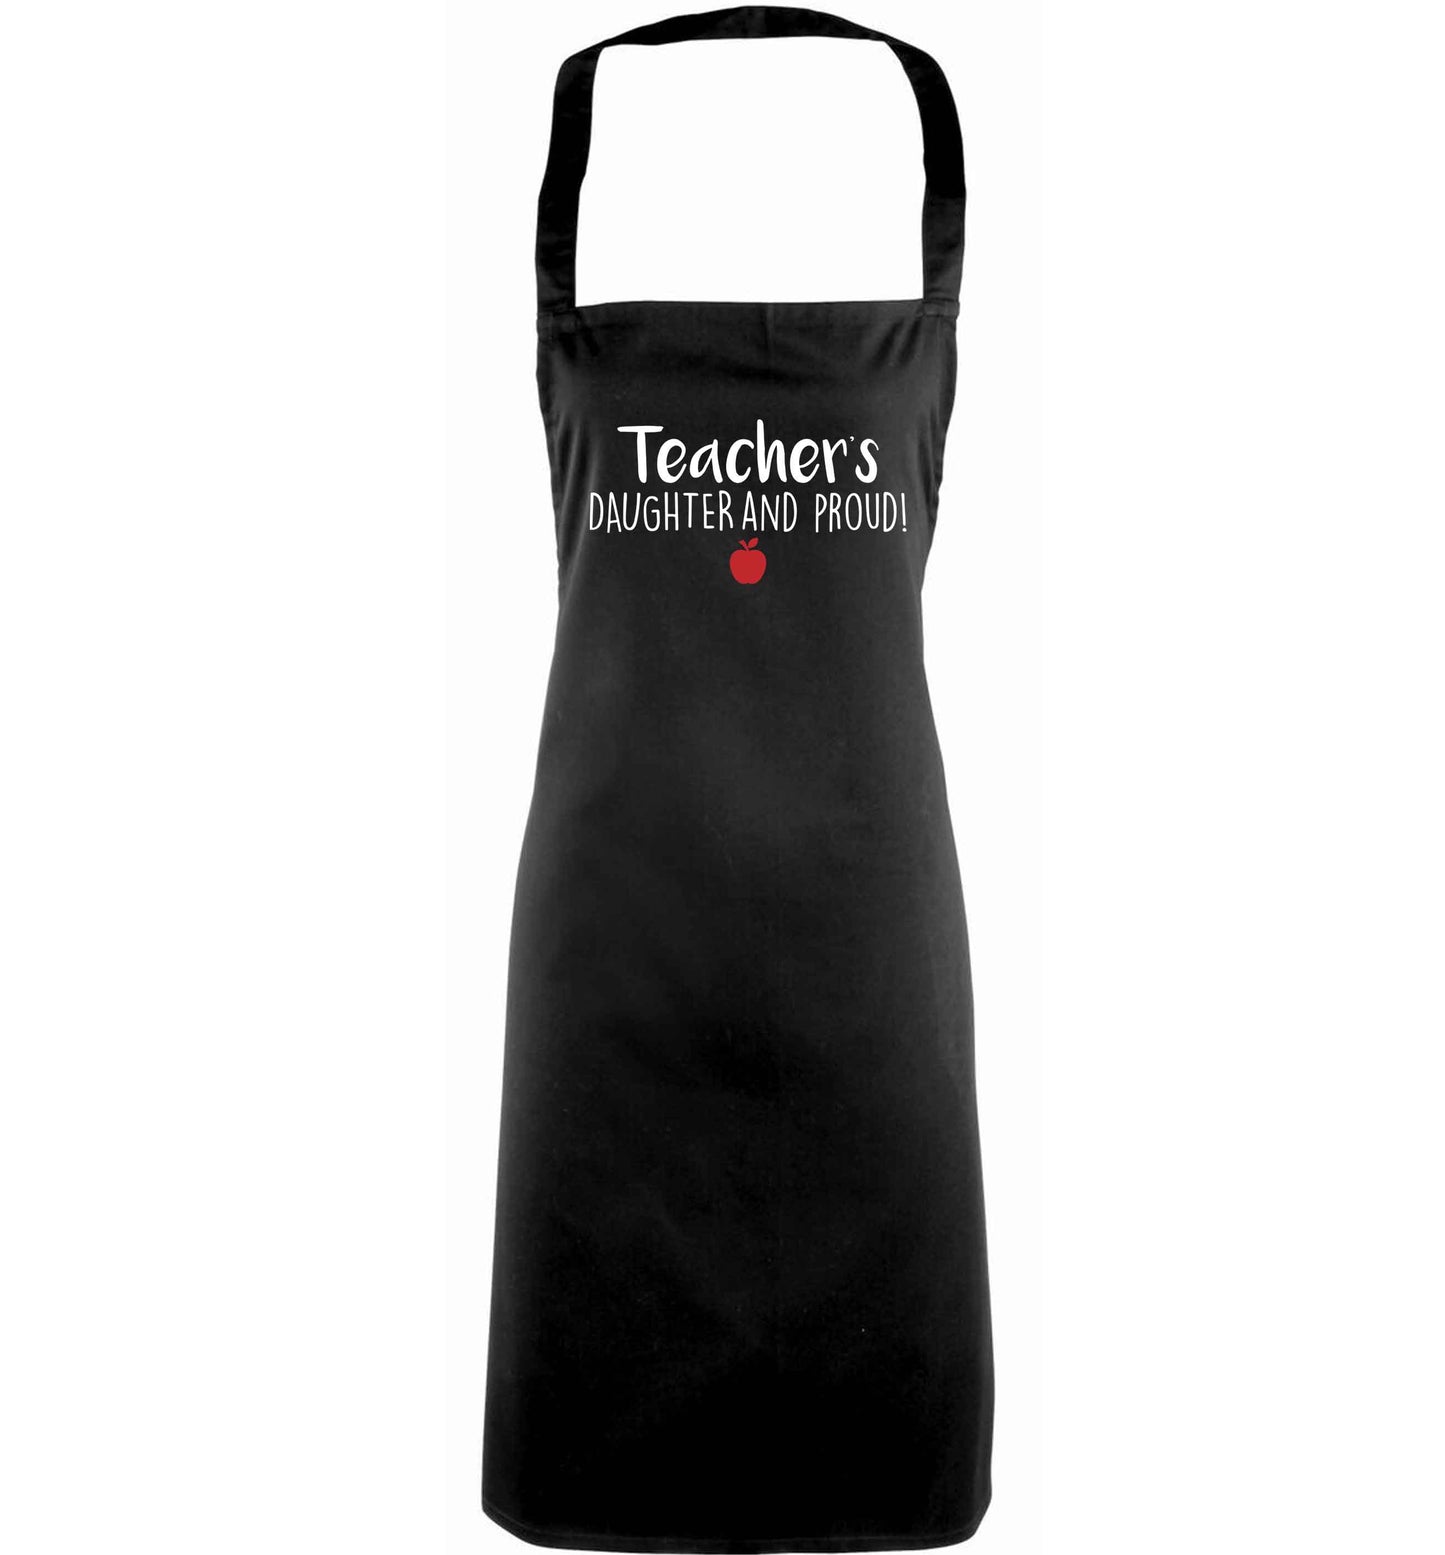 Teachers daughter and proud adults black apron